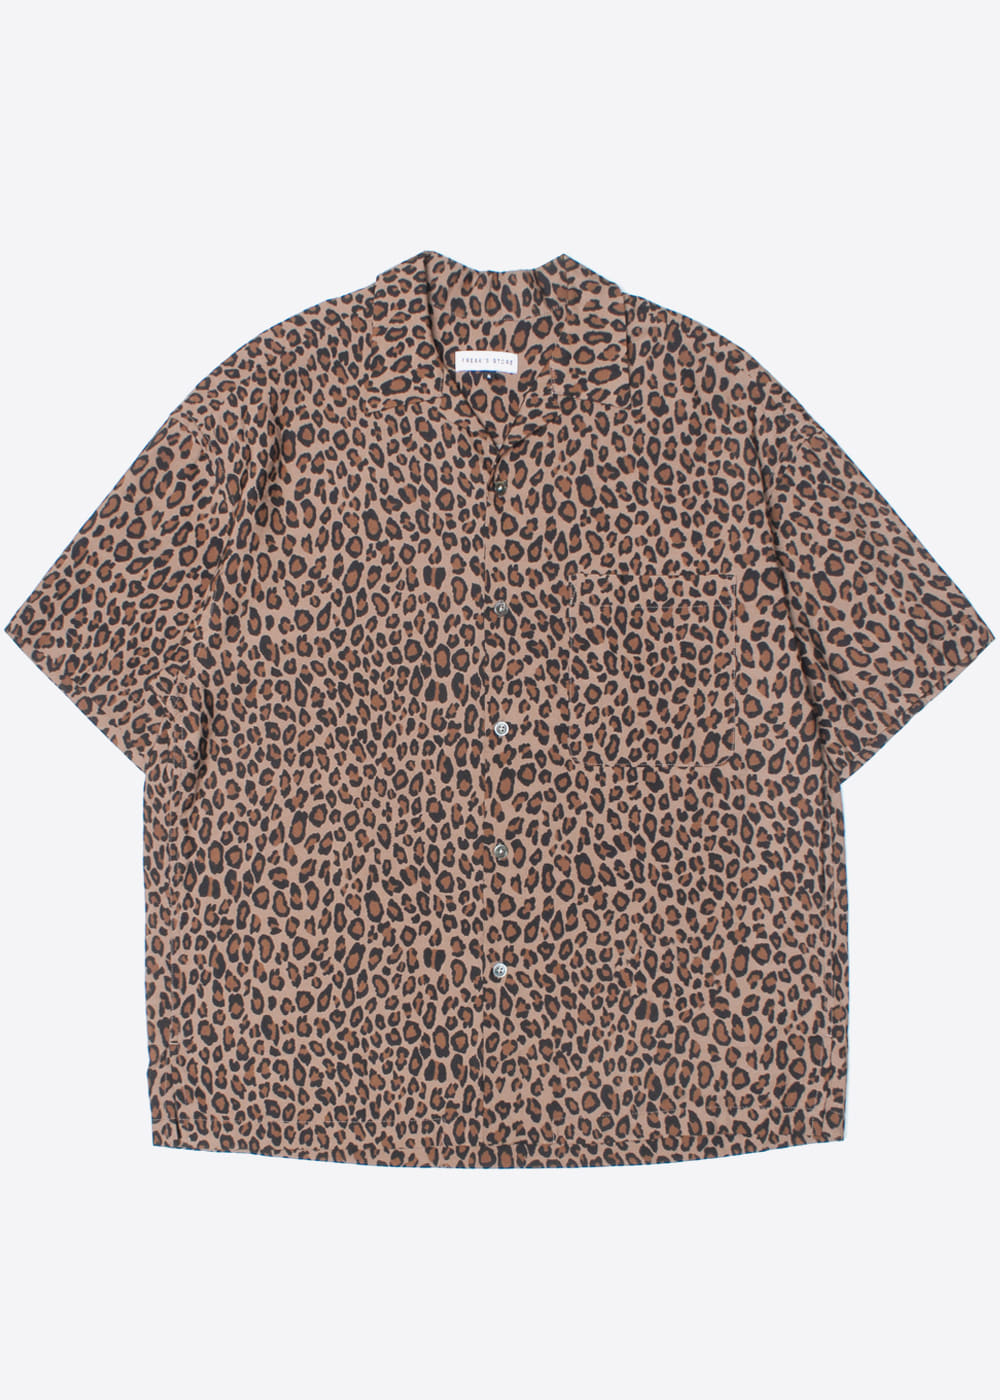 FREAK’S STORE’over fit’ poly leopard shirt